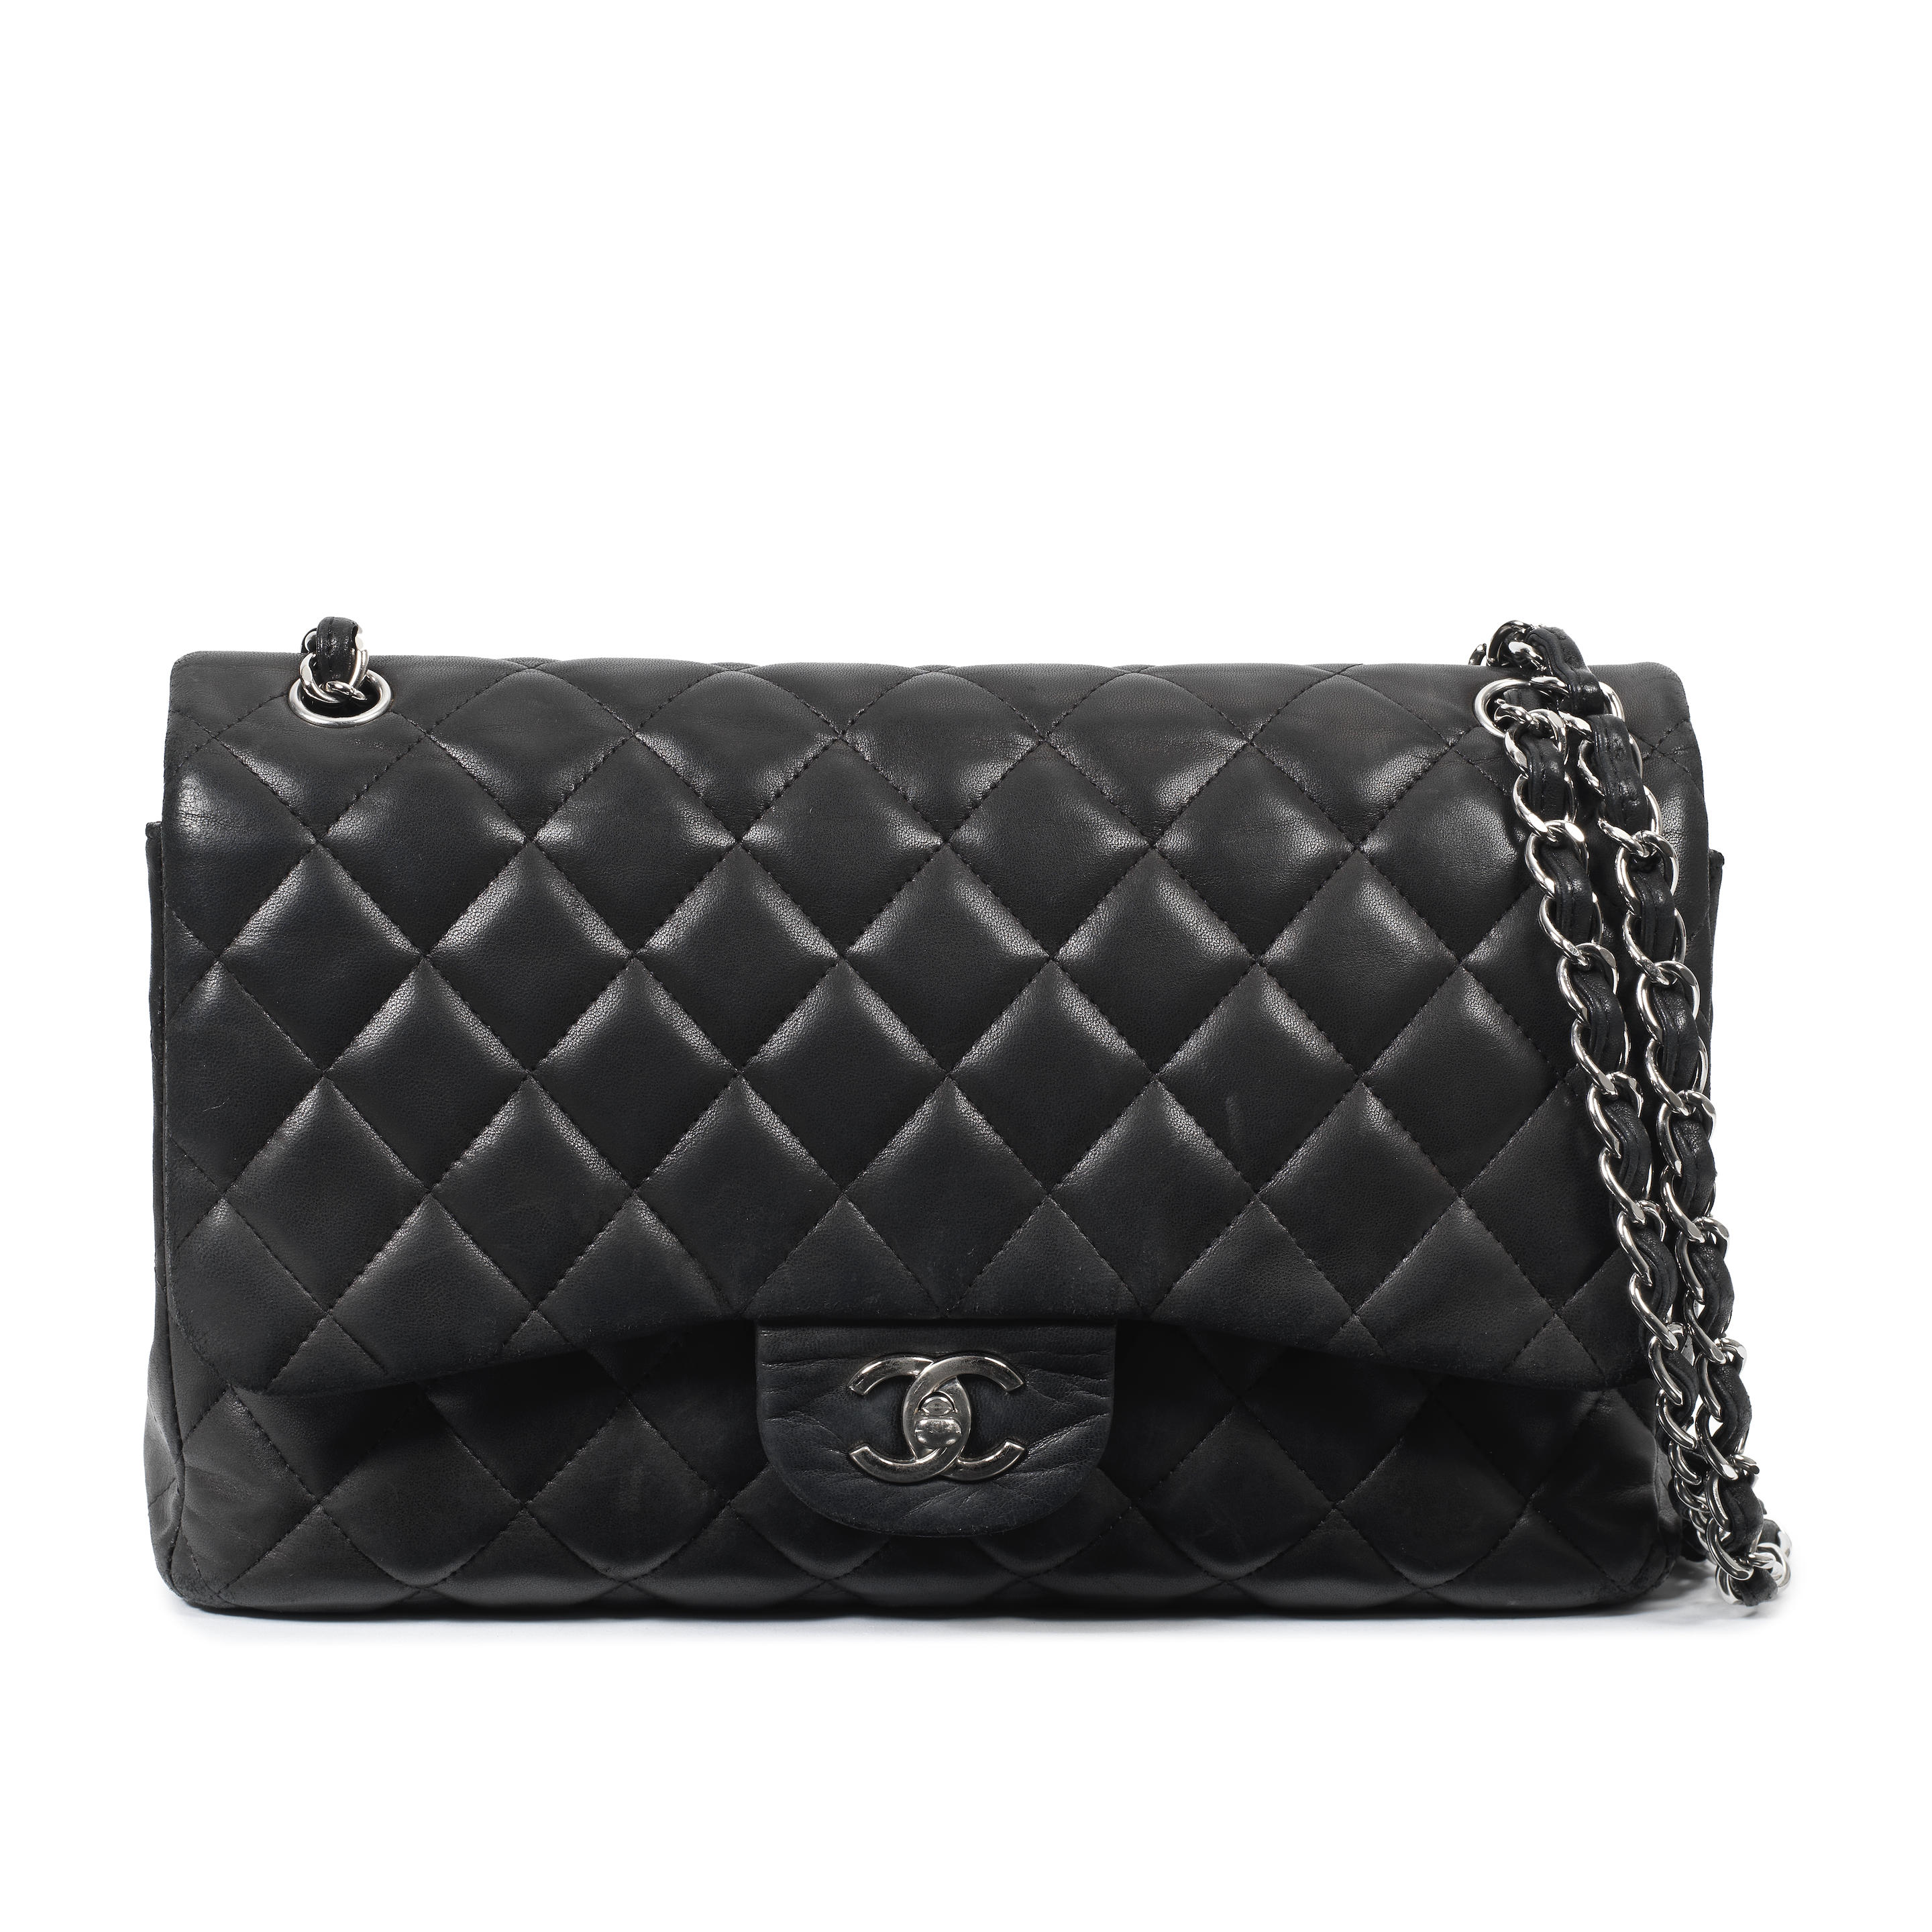 Bonhams : Chanel a Black Lambskin Jumbo Classic Flap Bag 2011-12 (includes  authenticity card, booklet, cleaning cloth, dust bag and box (serial  sticker missing))